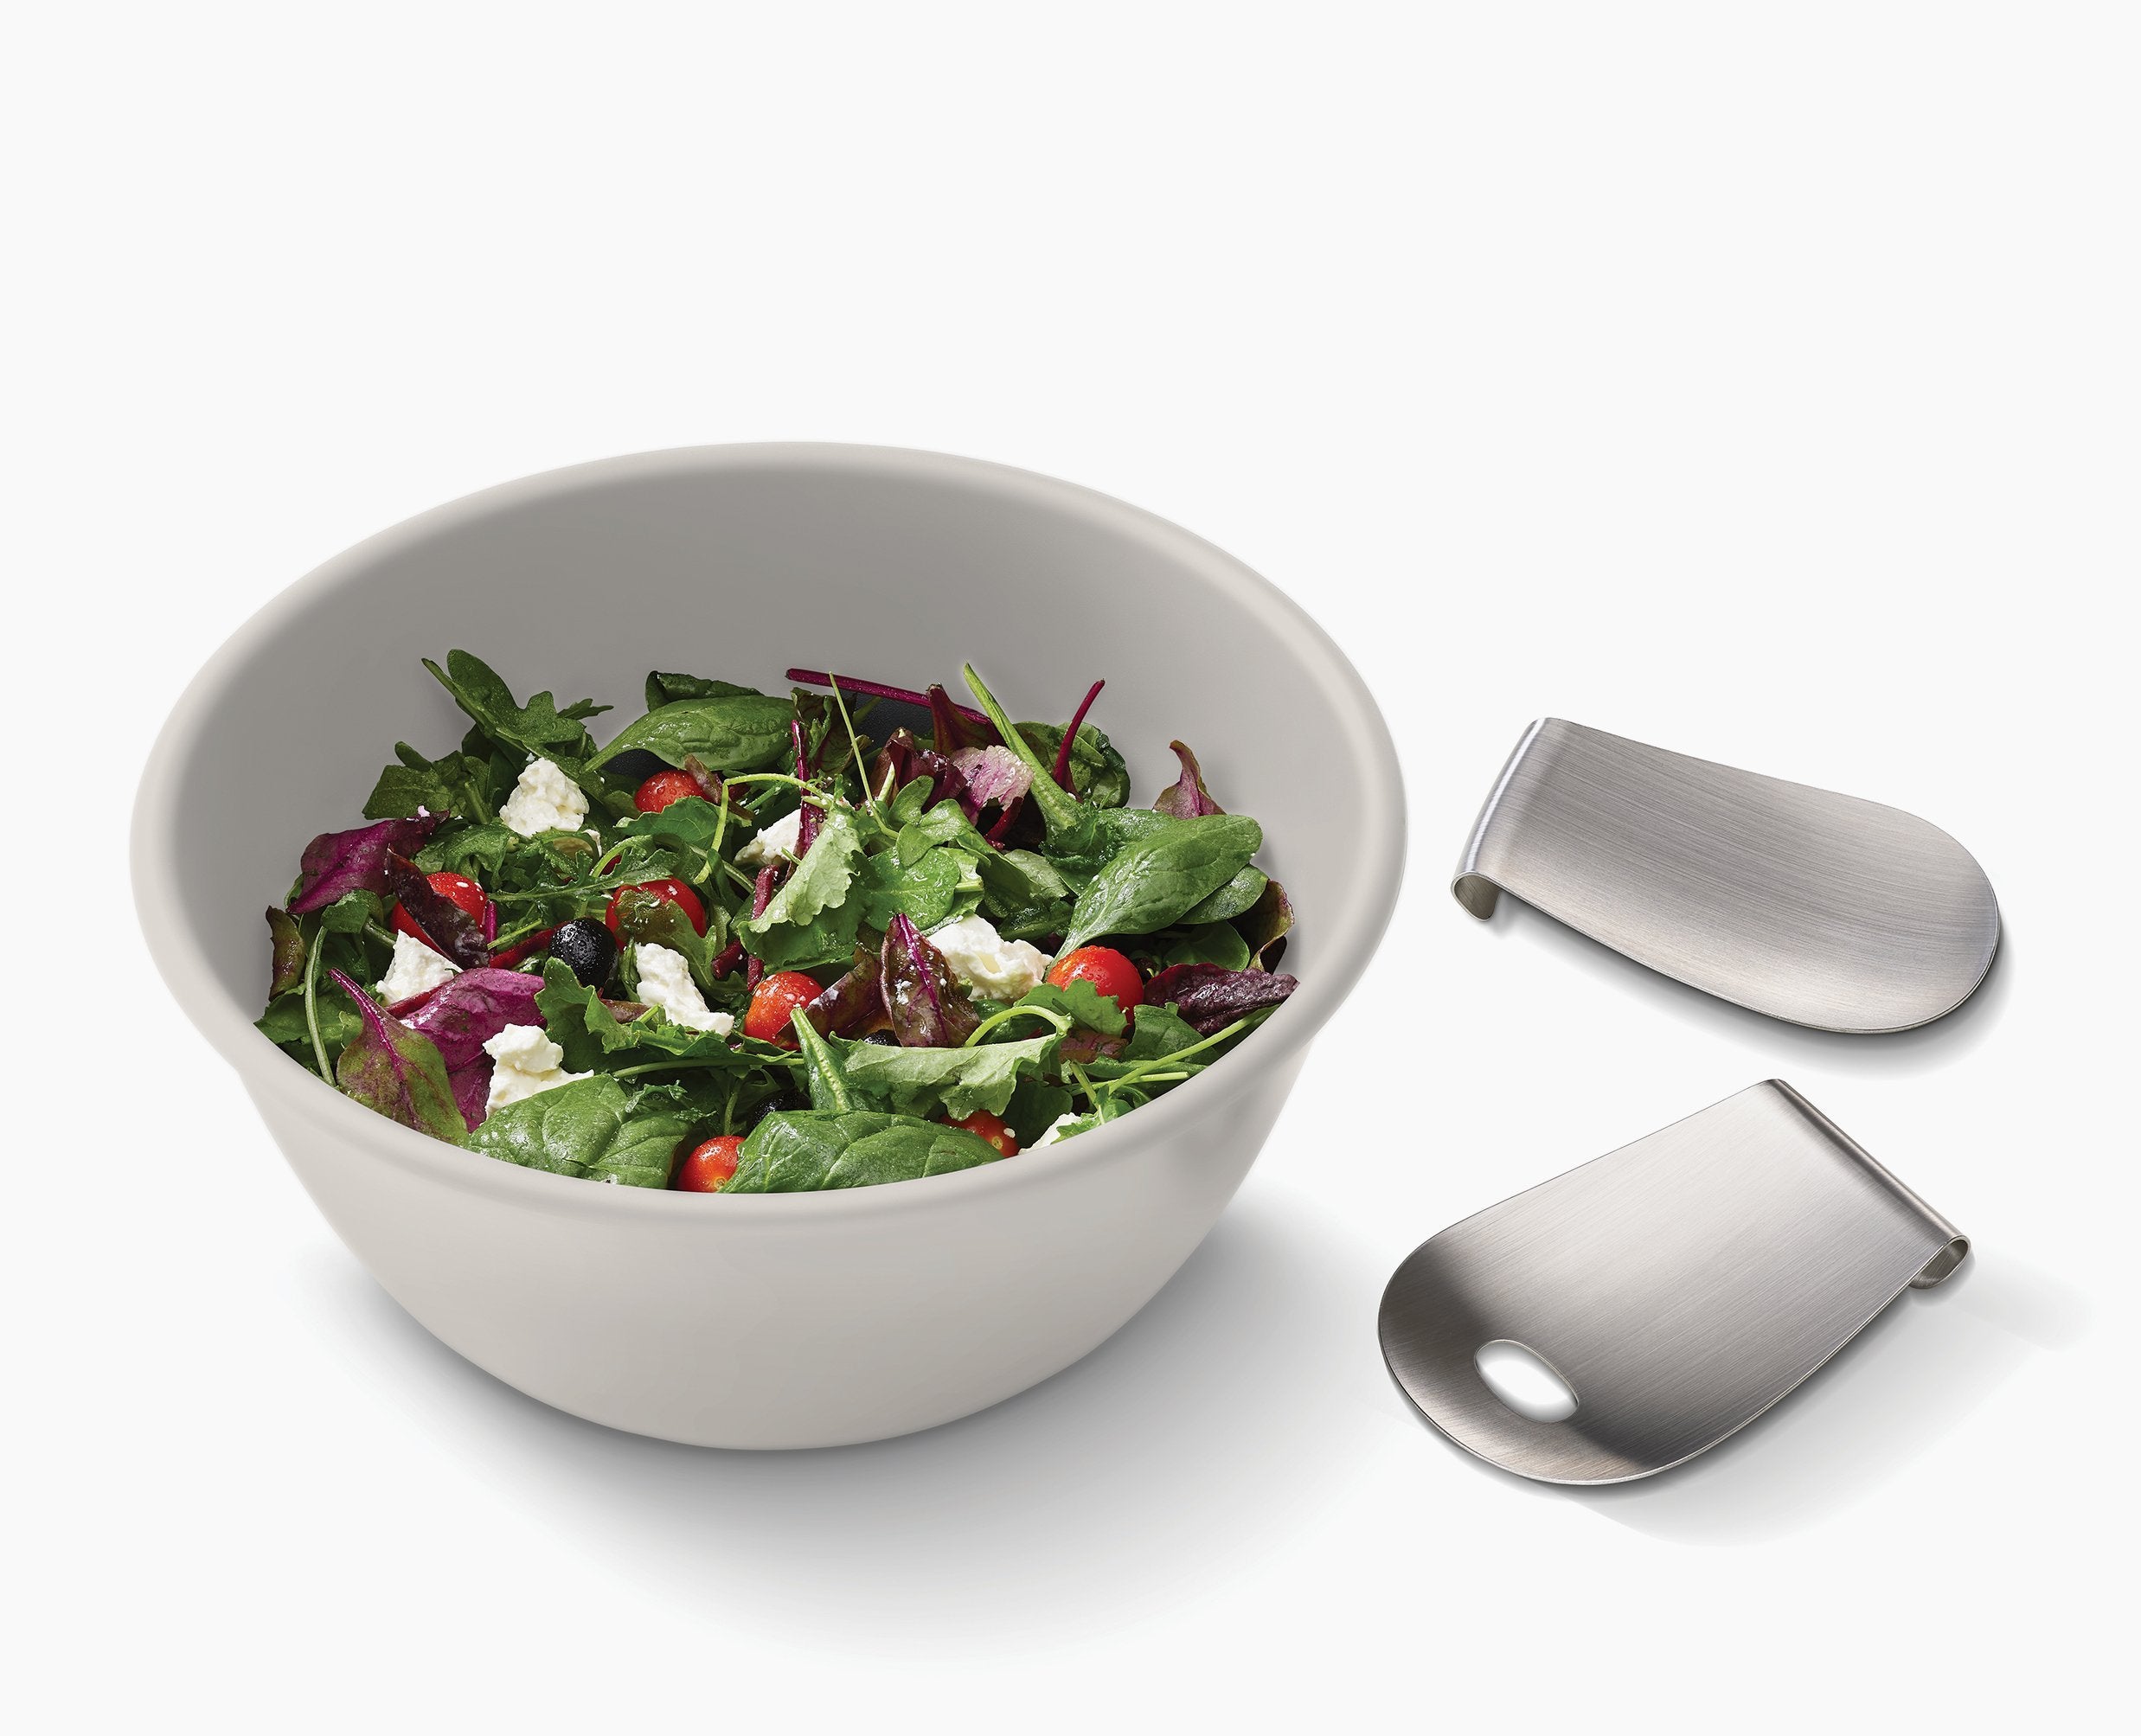 BEON.COM.AU  The servers of this stylish salad bowl set store conveniently on the edge of the bowl, thereby freeing-up drawer space and eliminating the need to hunt around for them when required.  Space-saving servers conveniently store on the edge of the bowl Large serving bowl perfect for salads, rice or p... Joseph Joseph at BEON.COM.AU